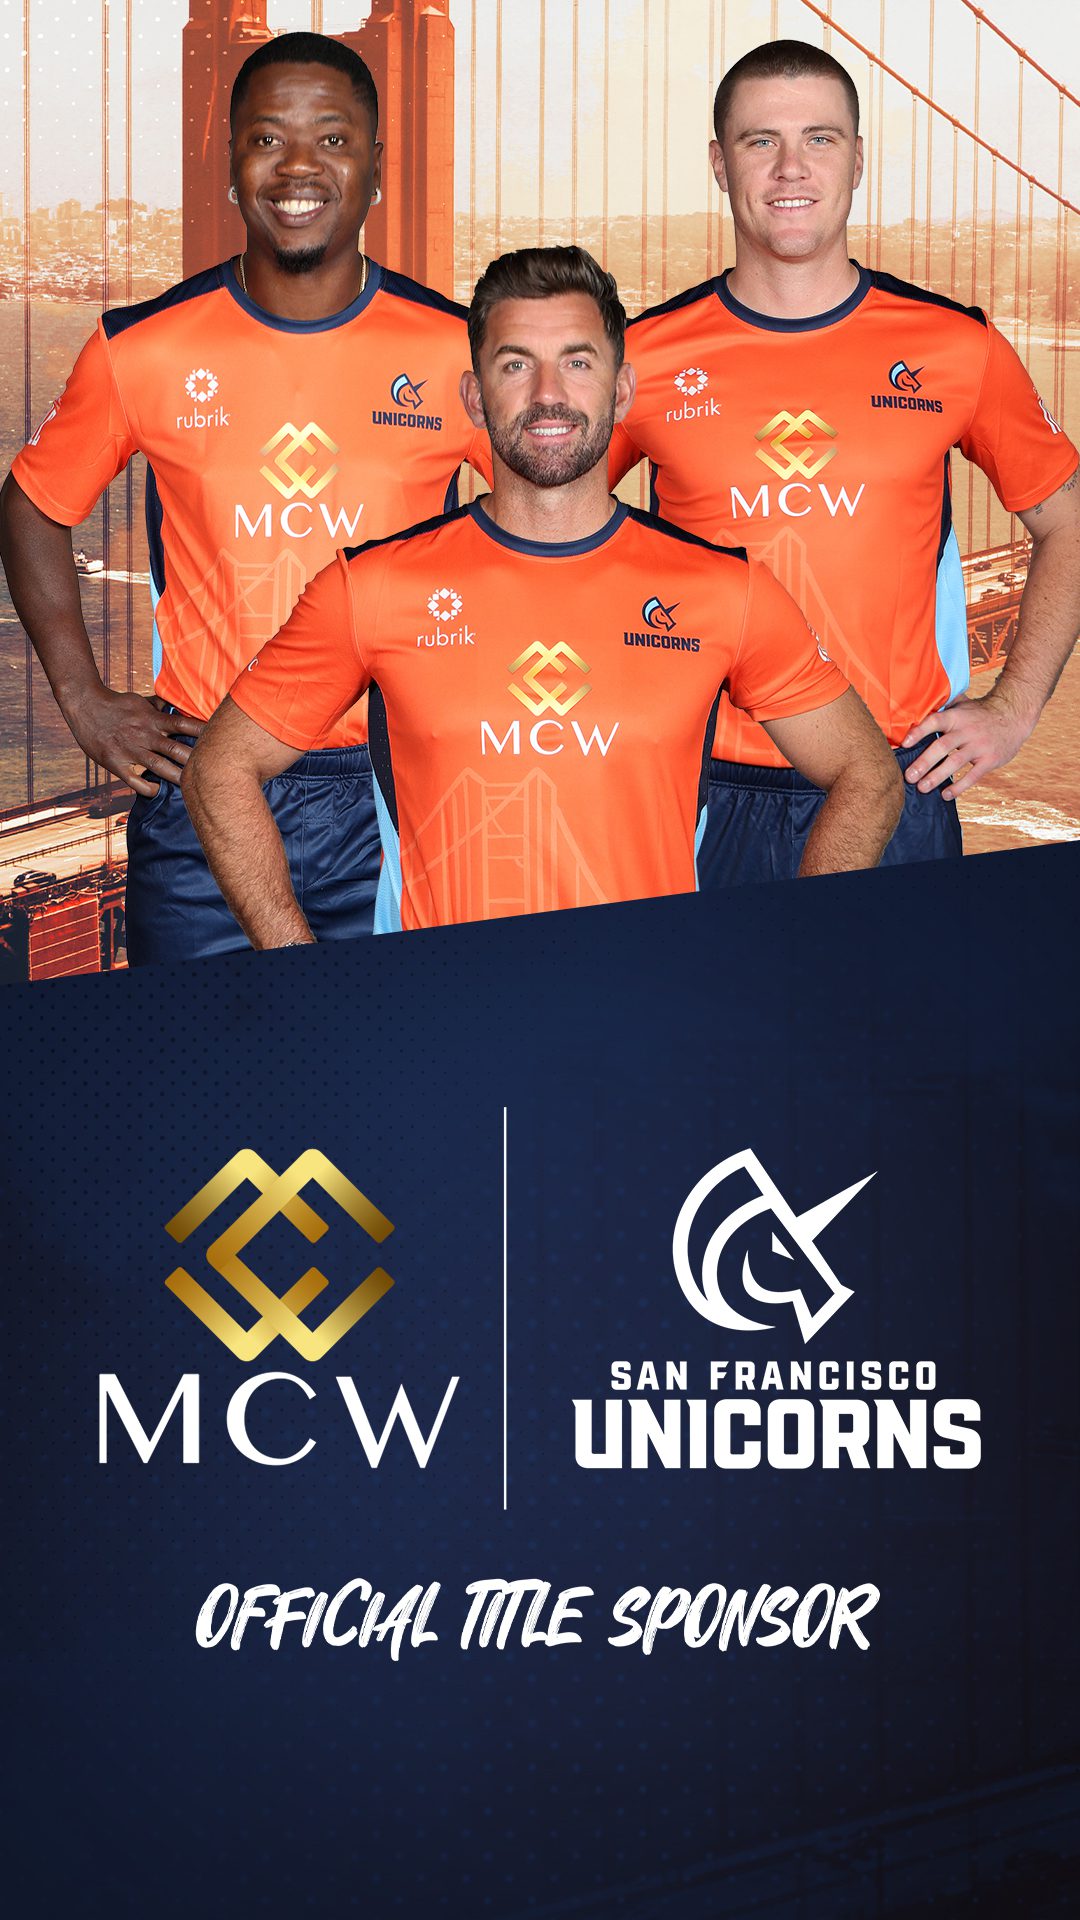 MCW and San Francisco Unicorns: Gold Meets Orange, Deal is Sealed